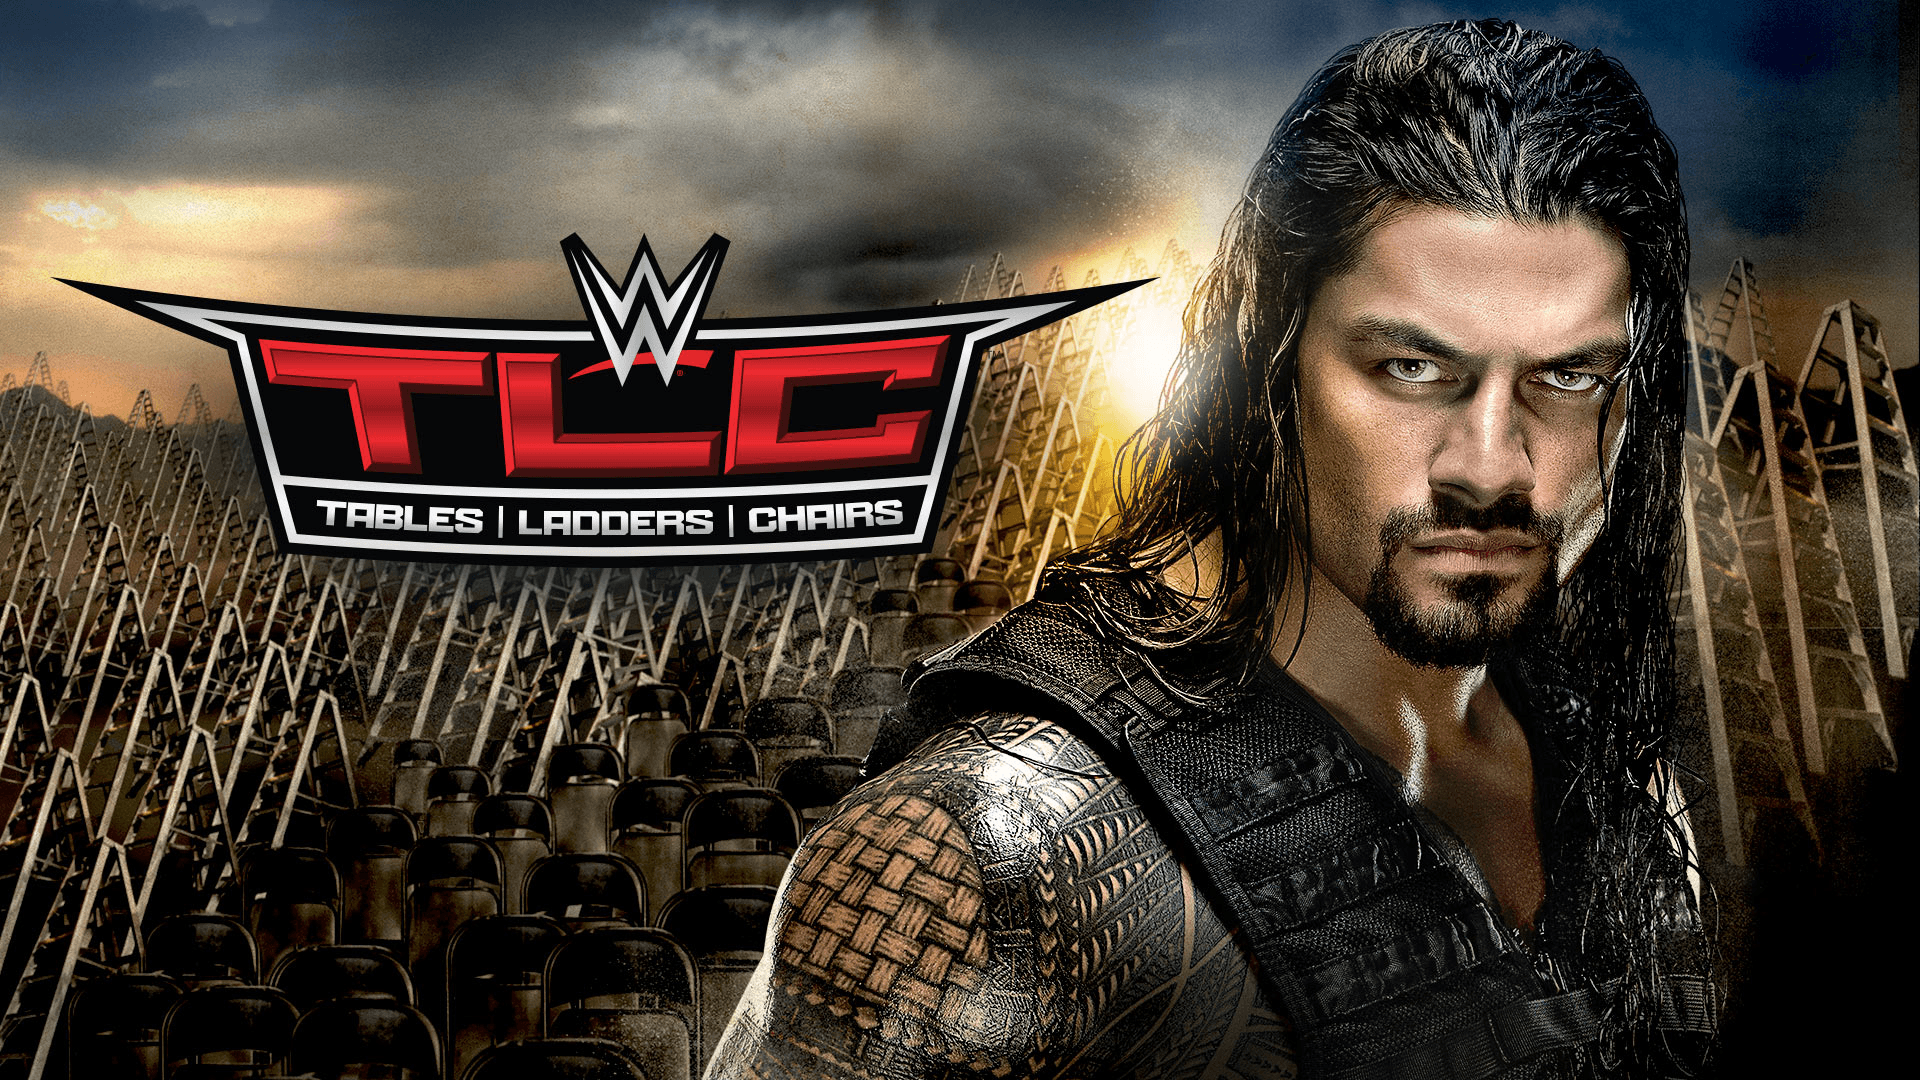 411MANIA. Greg DeMarco&;s Bold Predictions for WWE TLC 2015